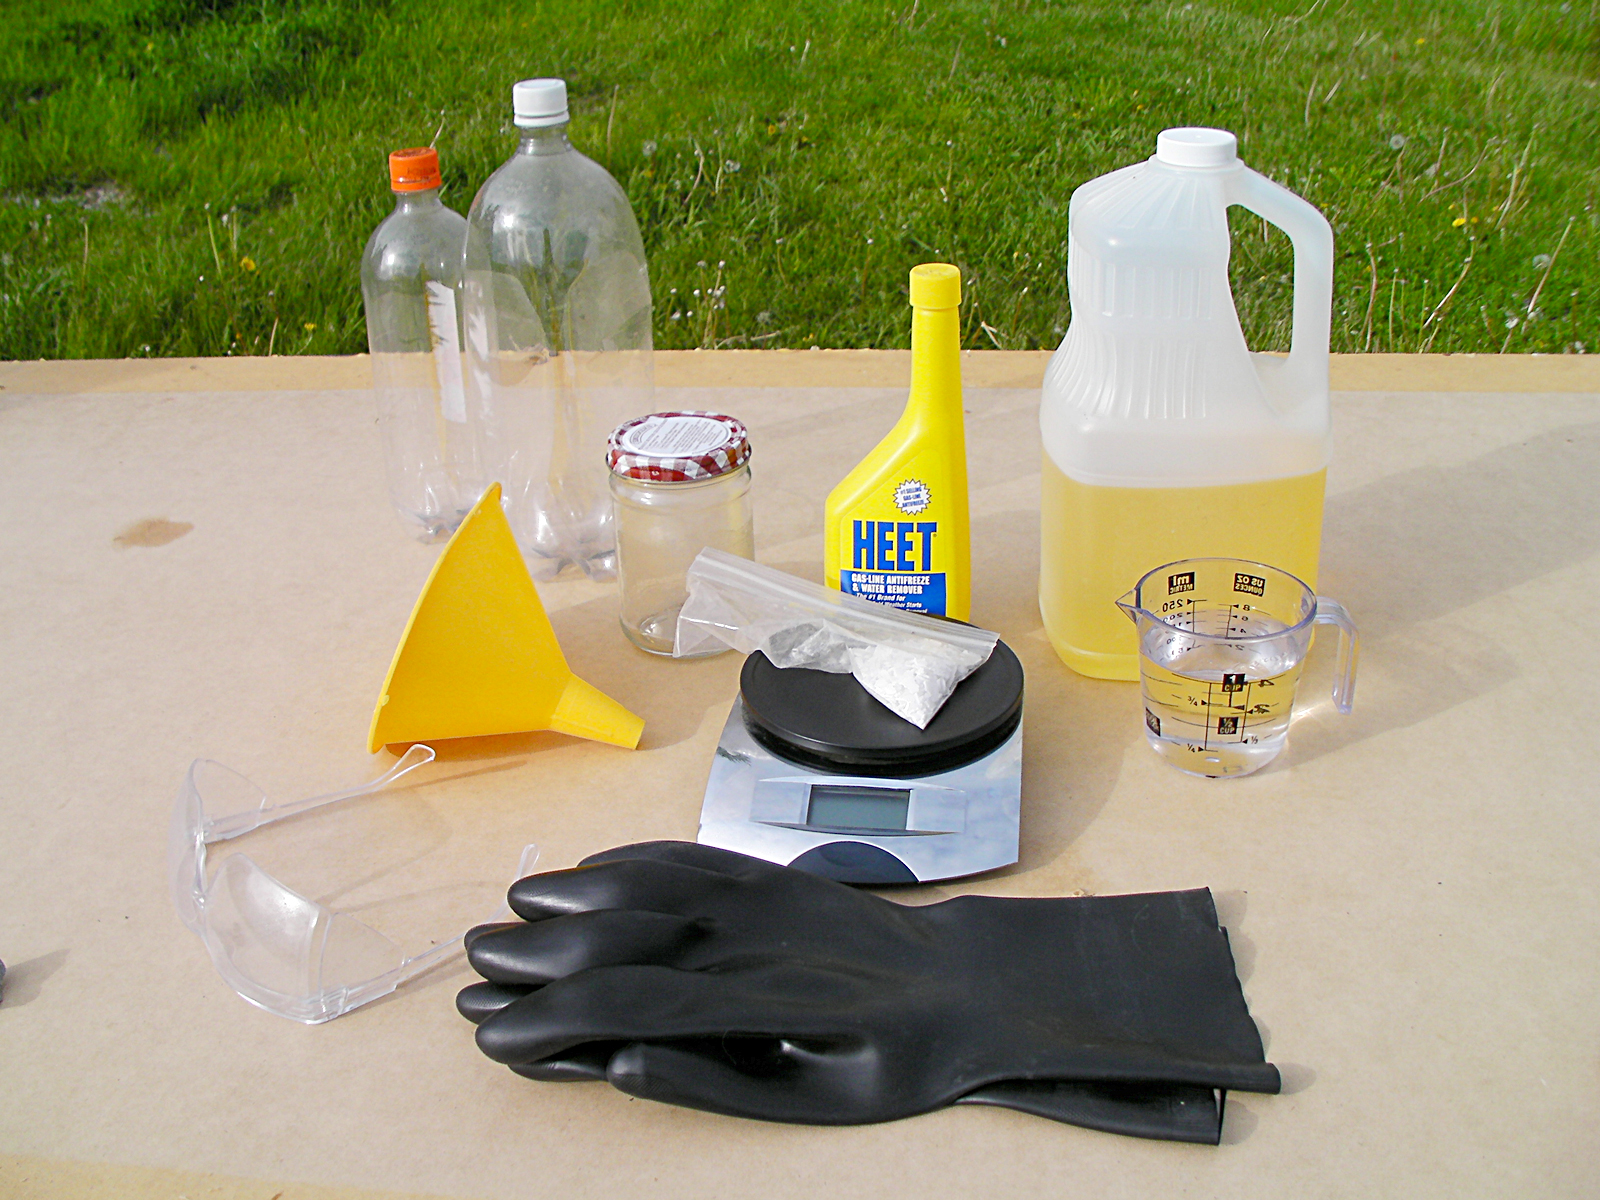 Items needed to make biodiesel